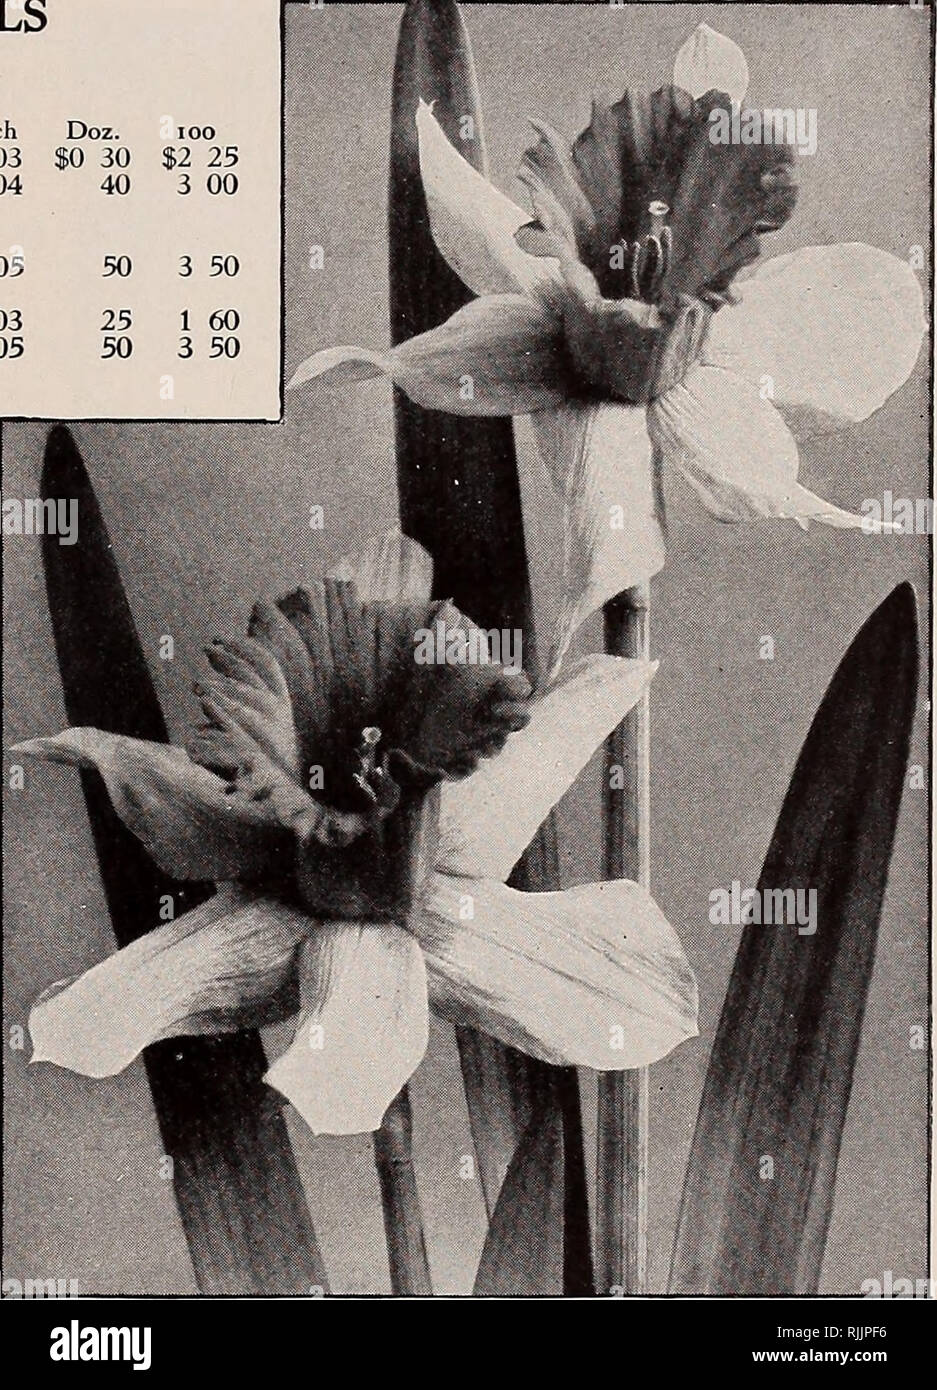 . Beckert's bulb catalogue : fall 1914. Nurseries (Horticulture) Pennsylvania Pittsburgh Catalogs; Nursery stock Pennsylvania Pittsburgh Catalogs; Flowers Seeds Pennsylvania Pittsburgh Catalogs; Bulbs (Plants) Pennsylvania Pittsburgh Catalogs; Gardening Pennsylvania Pittsburgh Equipment and supplies Catalogs. BECKERT'S ANNUAL AUTUMN CATALOGUE OF CHOICEST BULBS 11 06 15 $2 50 3 50 60 4 50 BICOLOR TRUMPET DAFFODILS The perianth white or light-colored, with yellow trumpet. Empress. Very large and beautiful white perianth, rich yellow trumpet. First size $20 per 1,000 Double-crown bulbs $25 per 1, Stock Photo